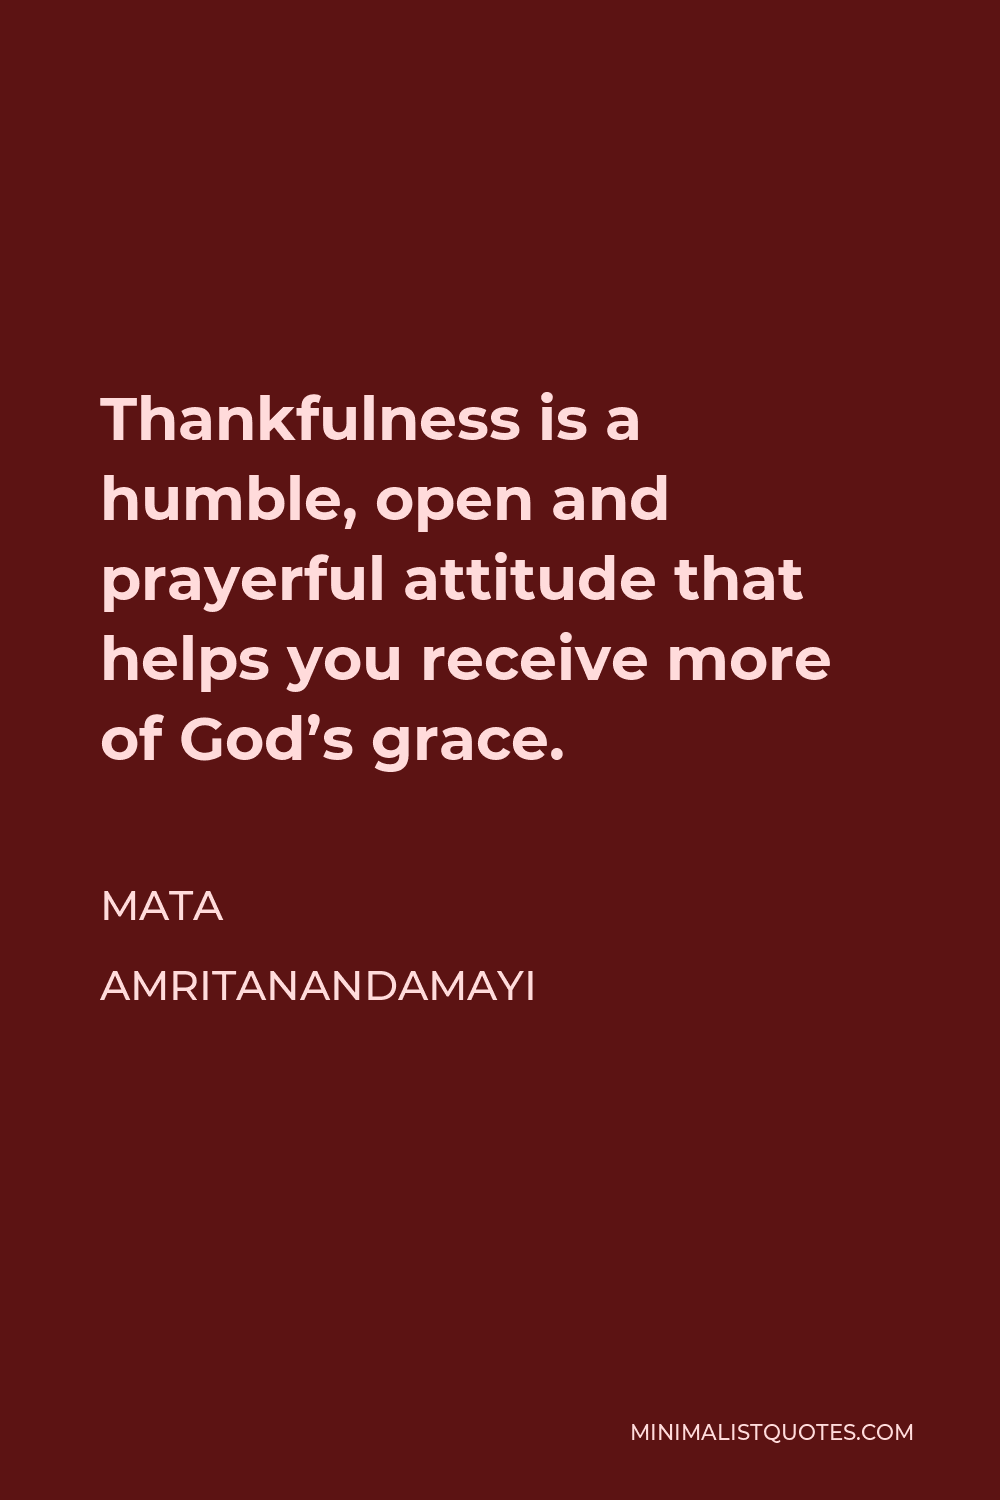 Mata Amritanandamayi Quote - Thankfulness is a humble, open and prayerful attitude that helps you receive more of God’s grace.